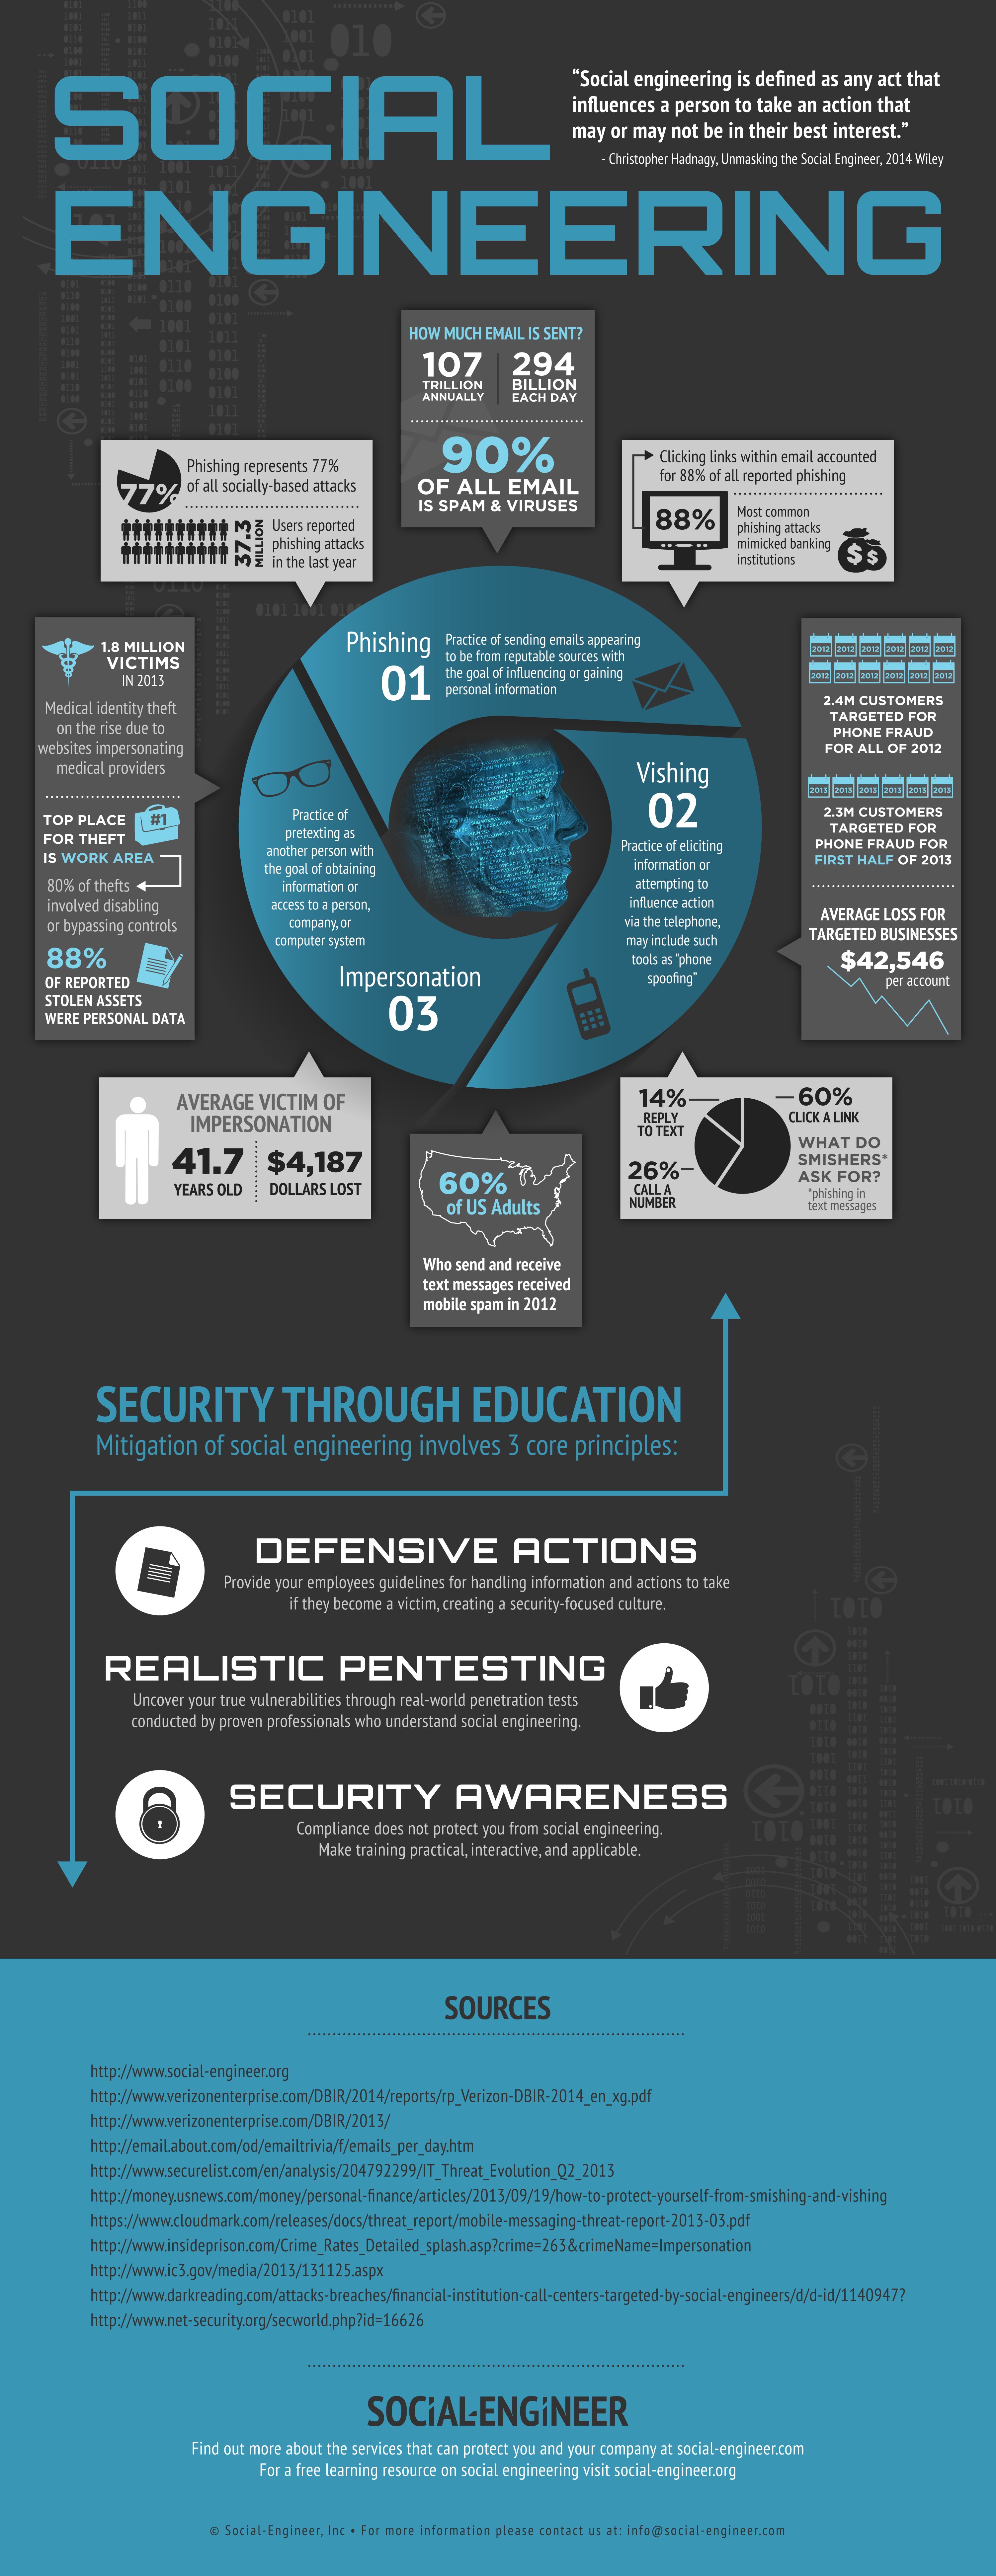 The Social Engineering Infographic – An infographic by the team at Social-Engineer, Inc all about Social Engineering Threats and Mitigations